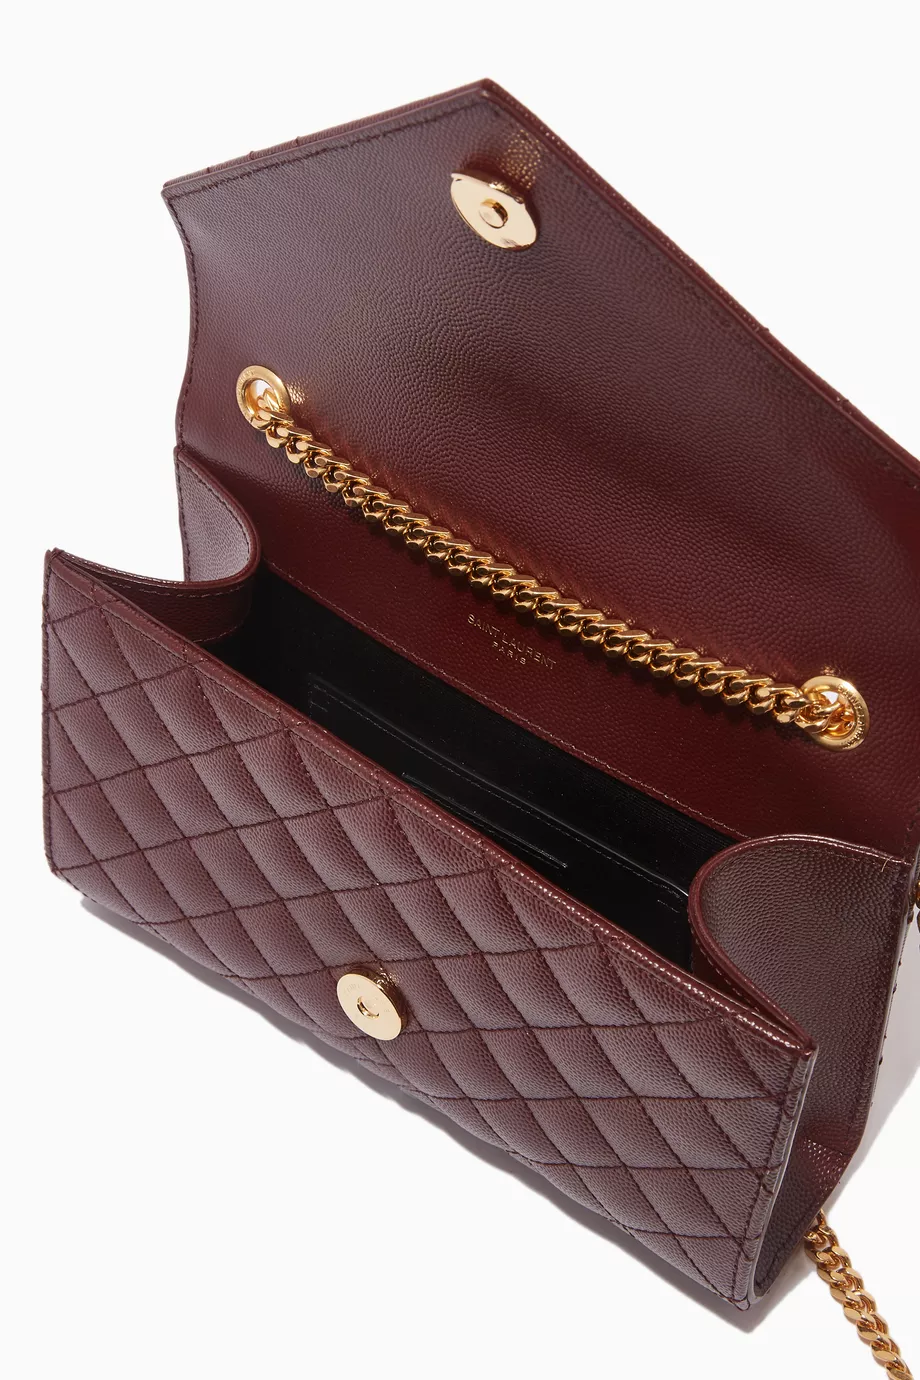 Saint Laurent Small Envelope Chain Bag In Mixed Grained Matelasse Leather  Red/Gold